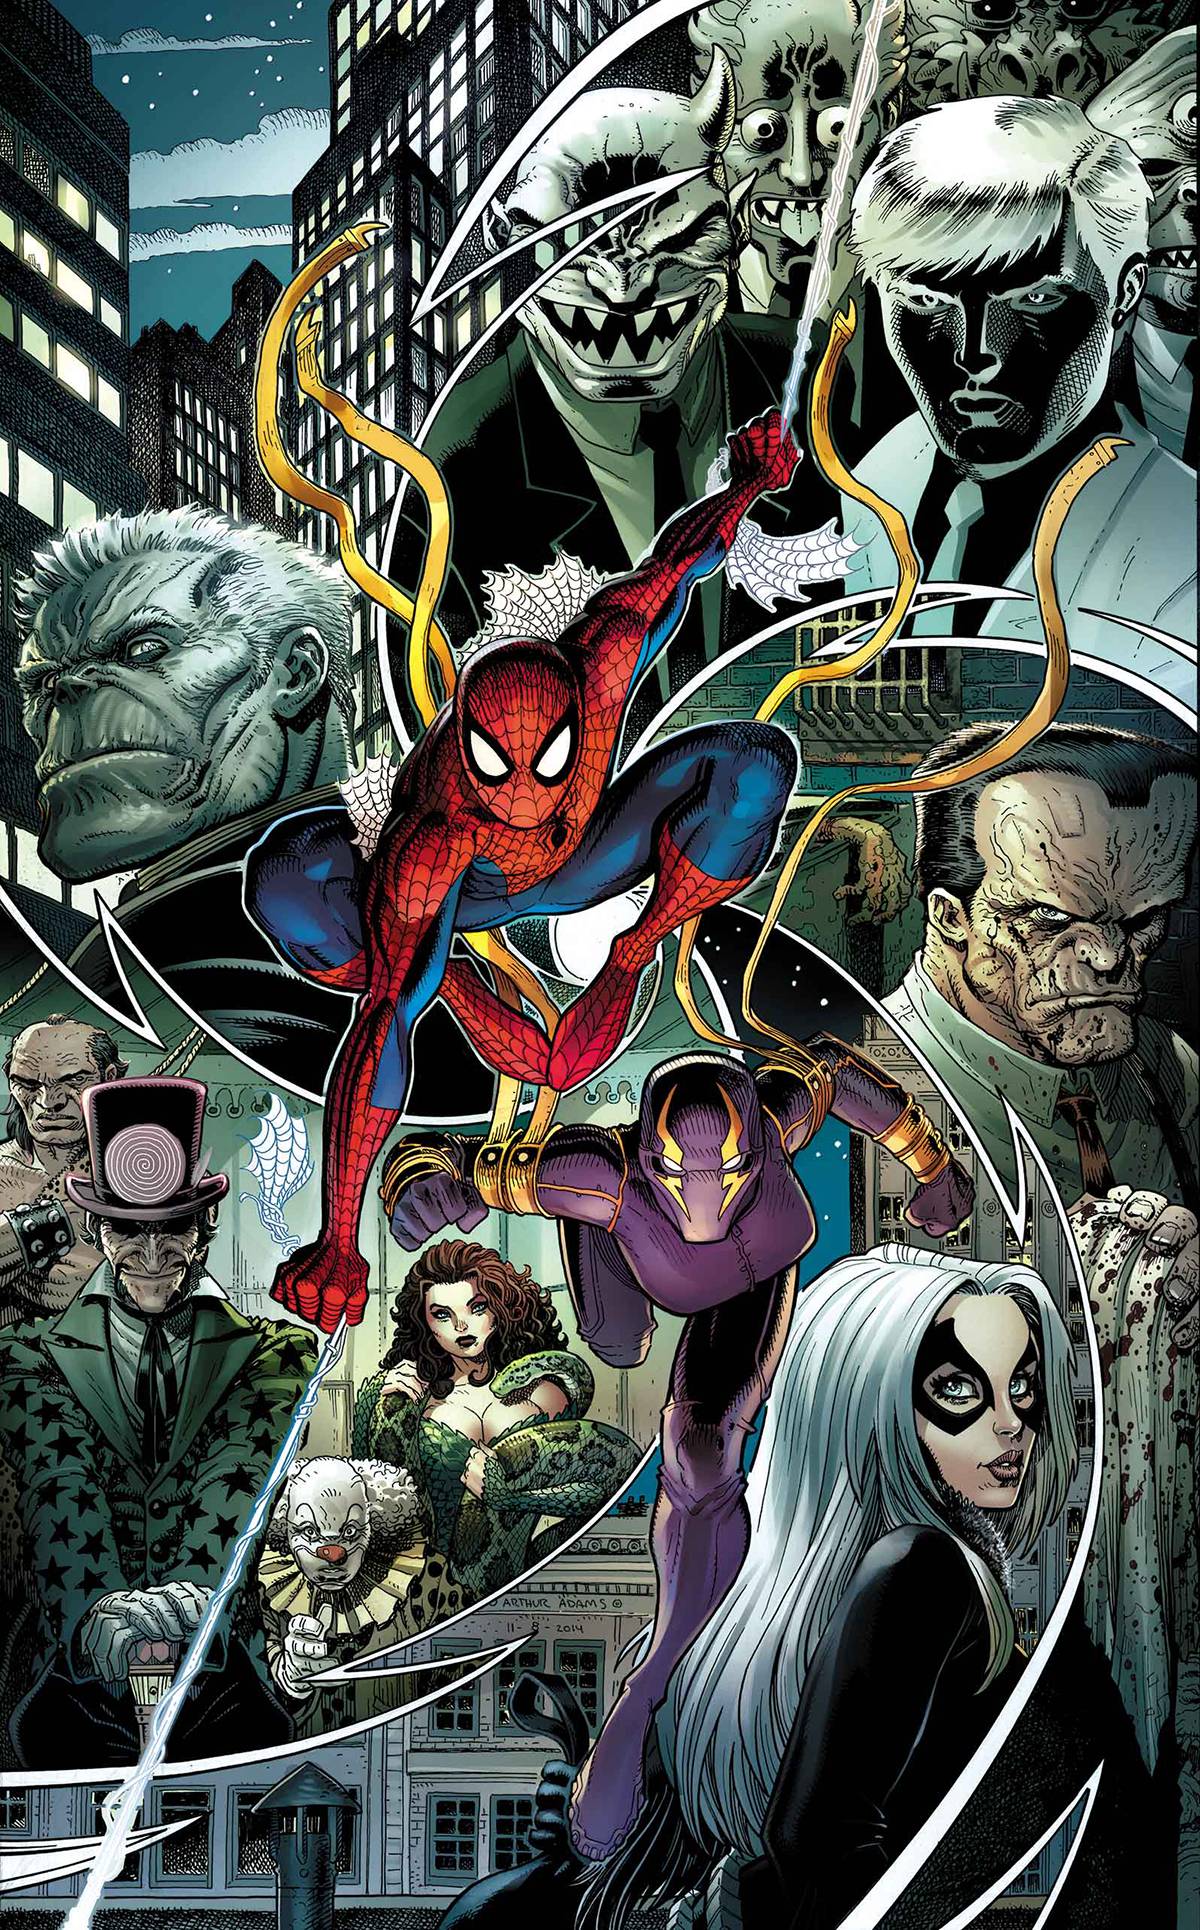 Amazing Spider-Man #16.1 by Adams Poster